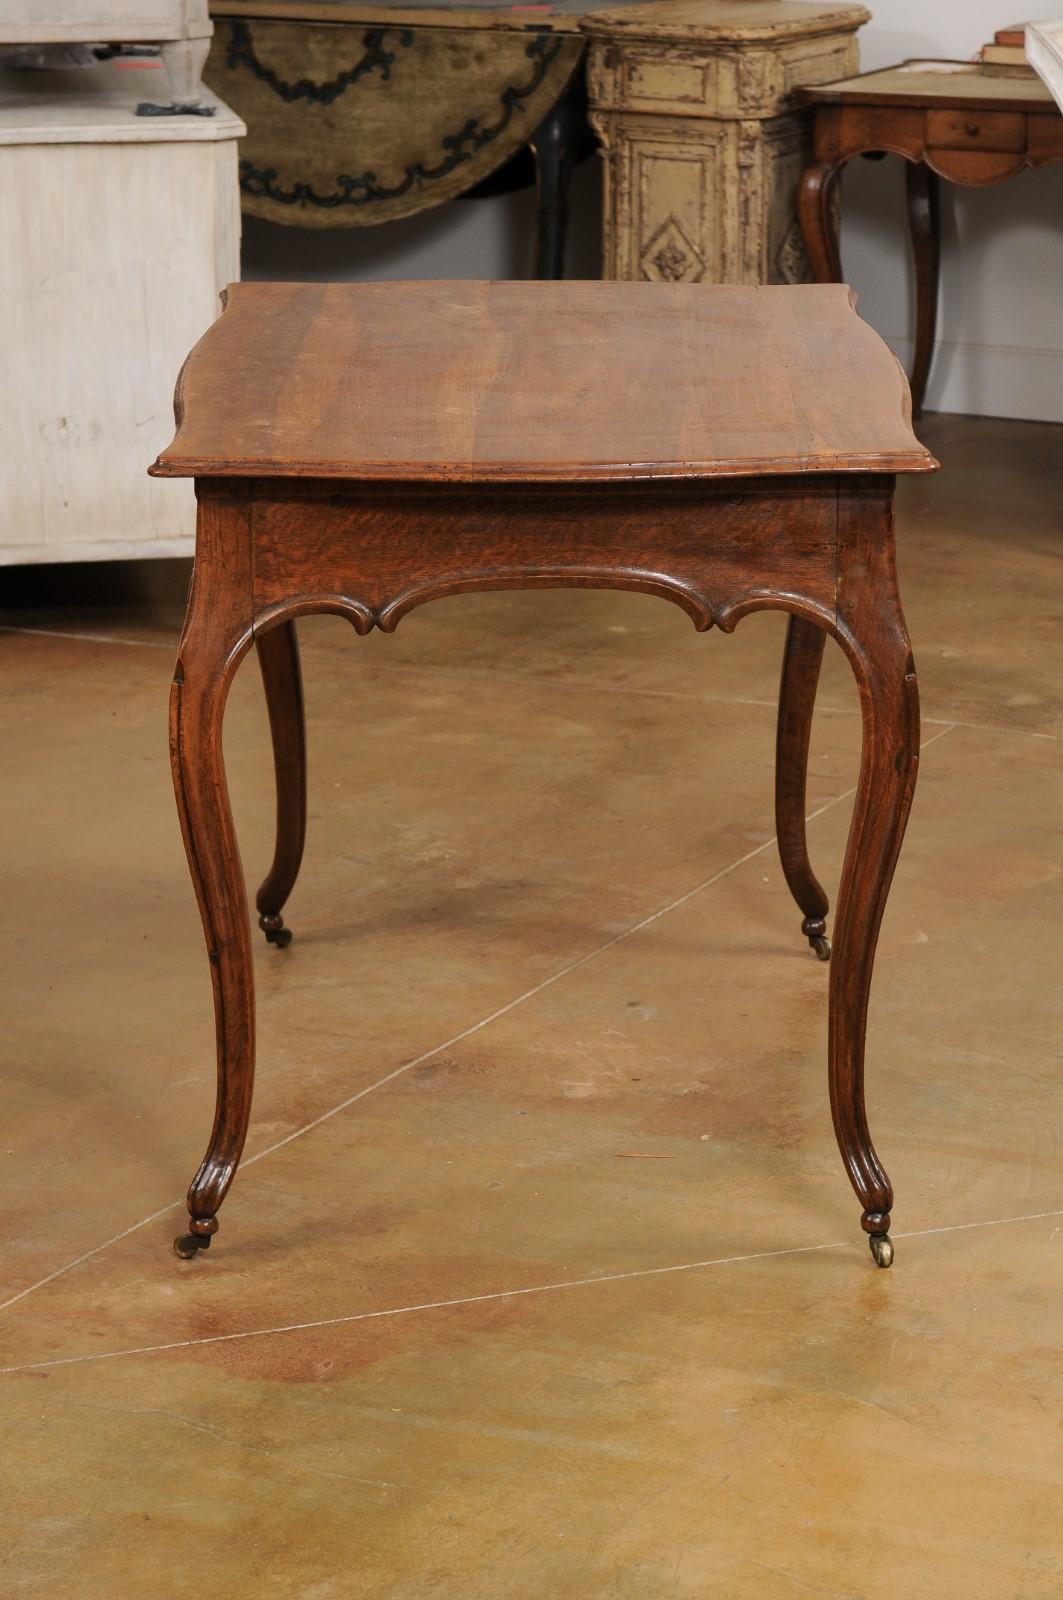 Italian Rococo Early 19th Century Oak Table with Carved Apron and Cabriole Legs For Sale 5